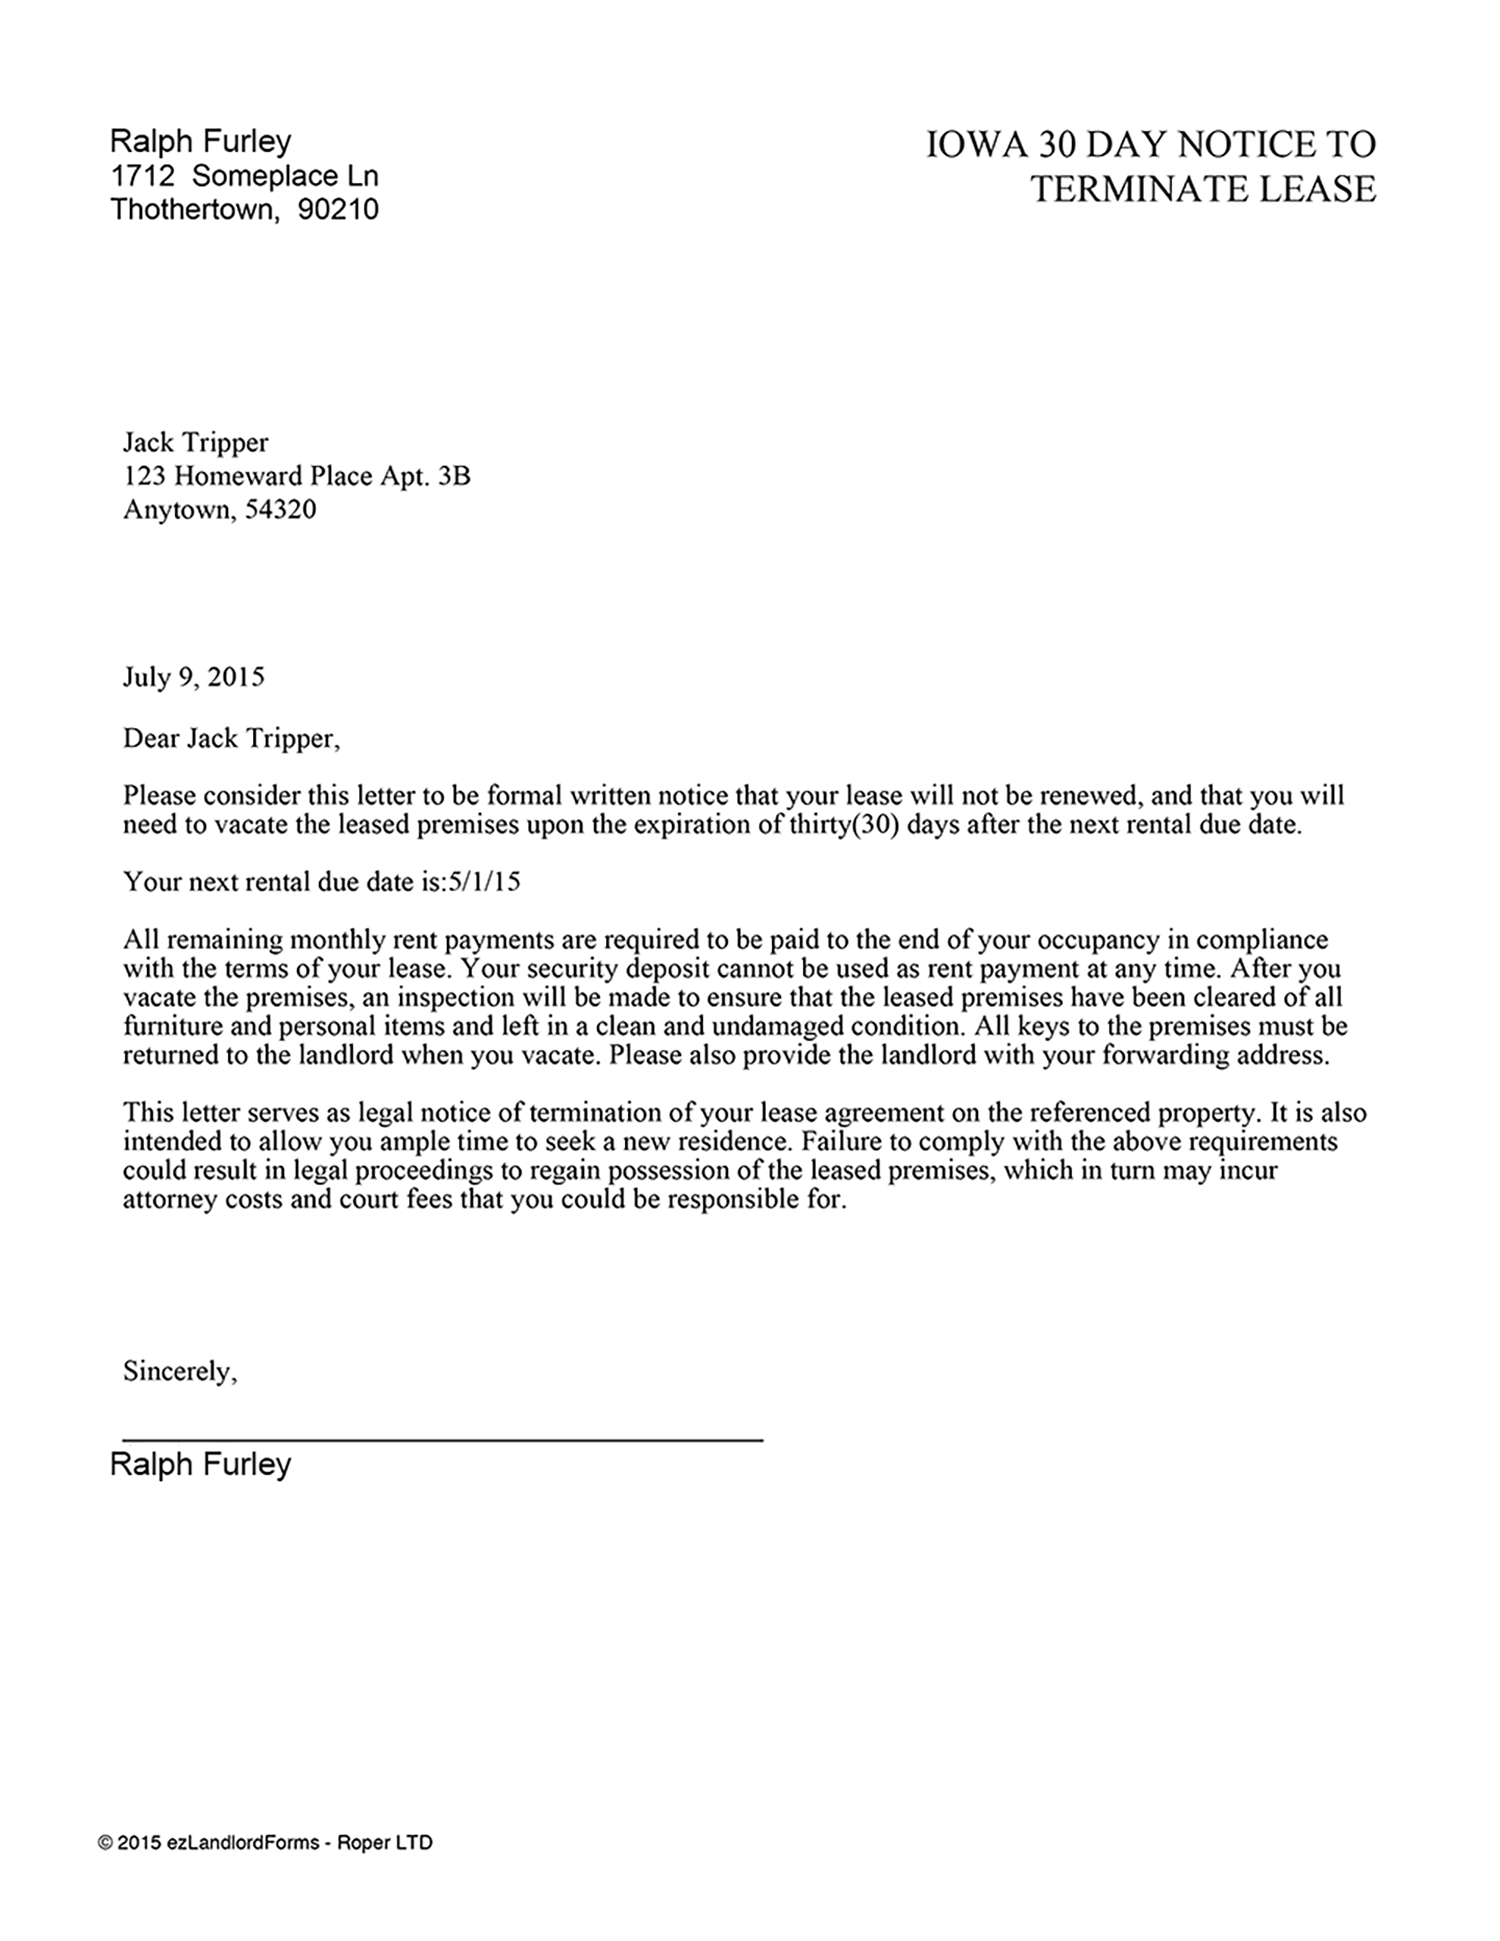 Month To Month Lease Termination Letter To Tenant from www.ezlandlordforms.com